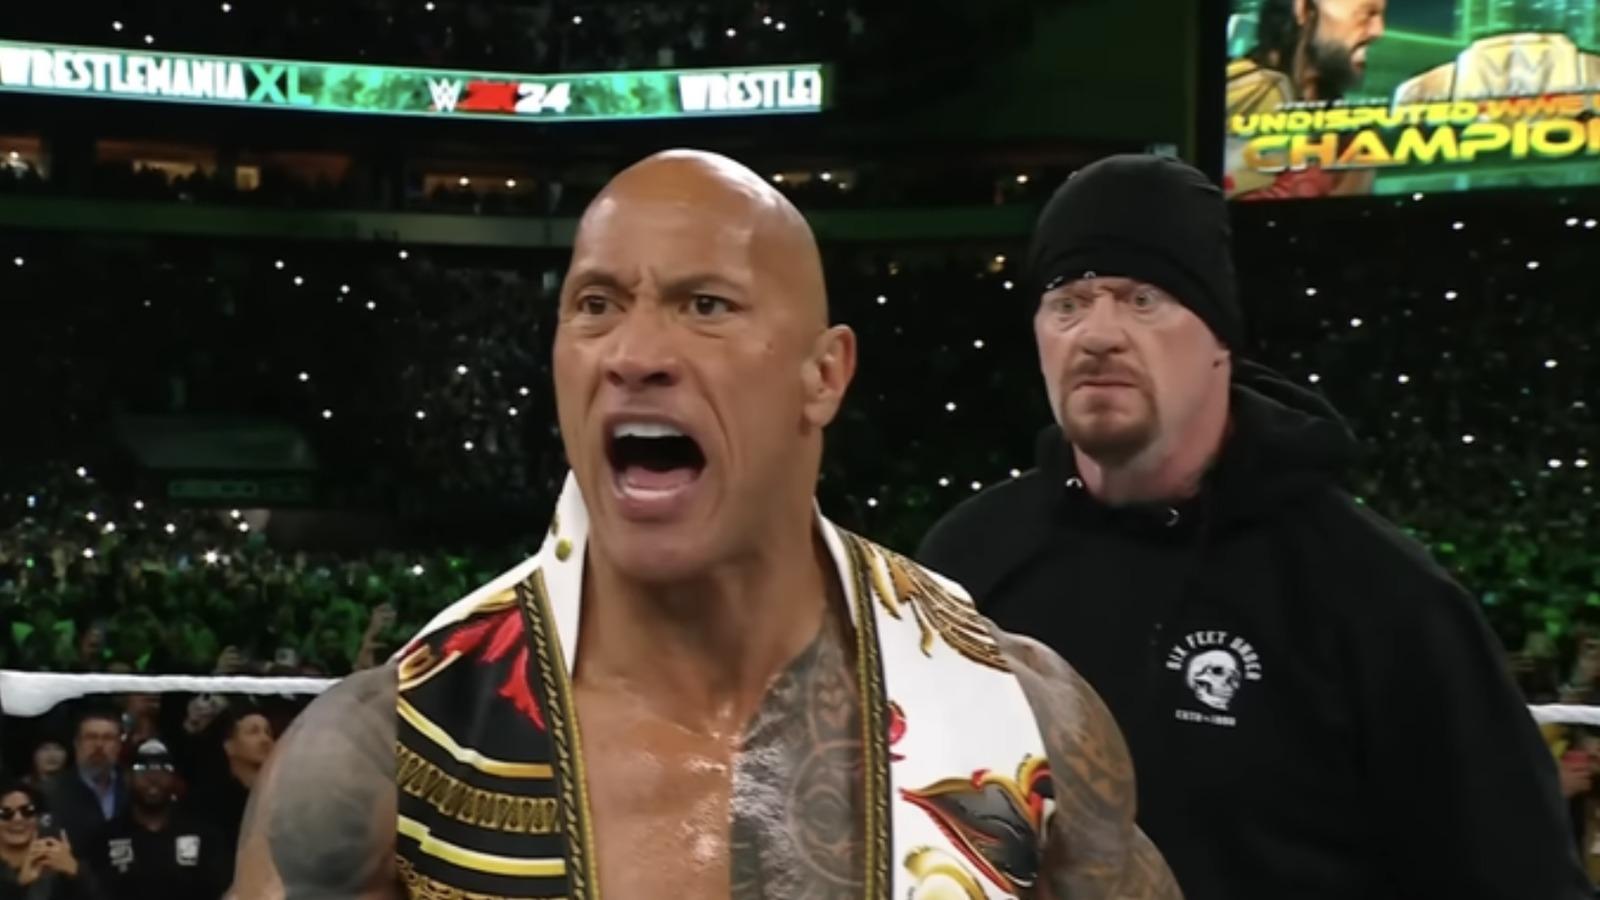 The Undertaker’s shocking Wrestlemania cameo was the perfect cap to his historic WWE career